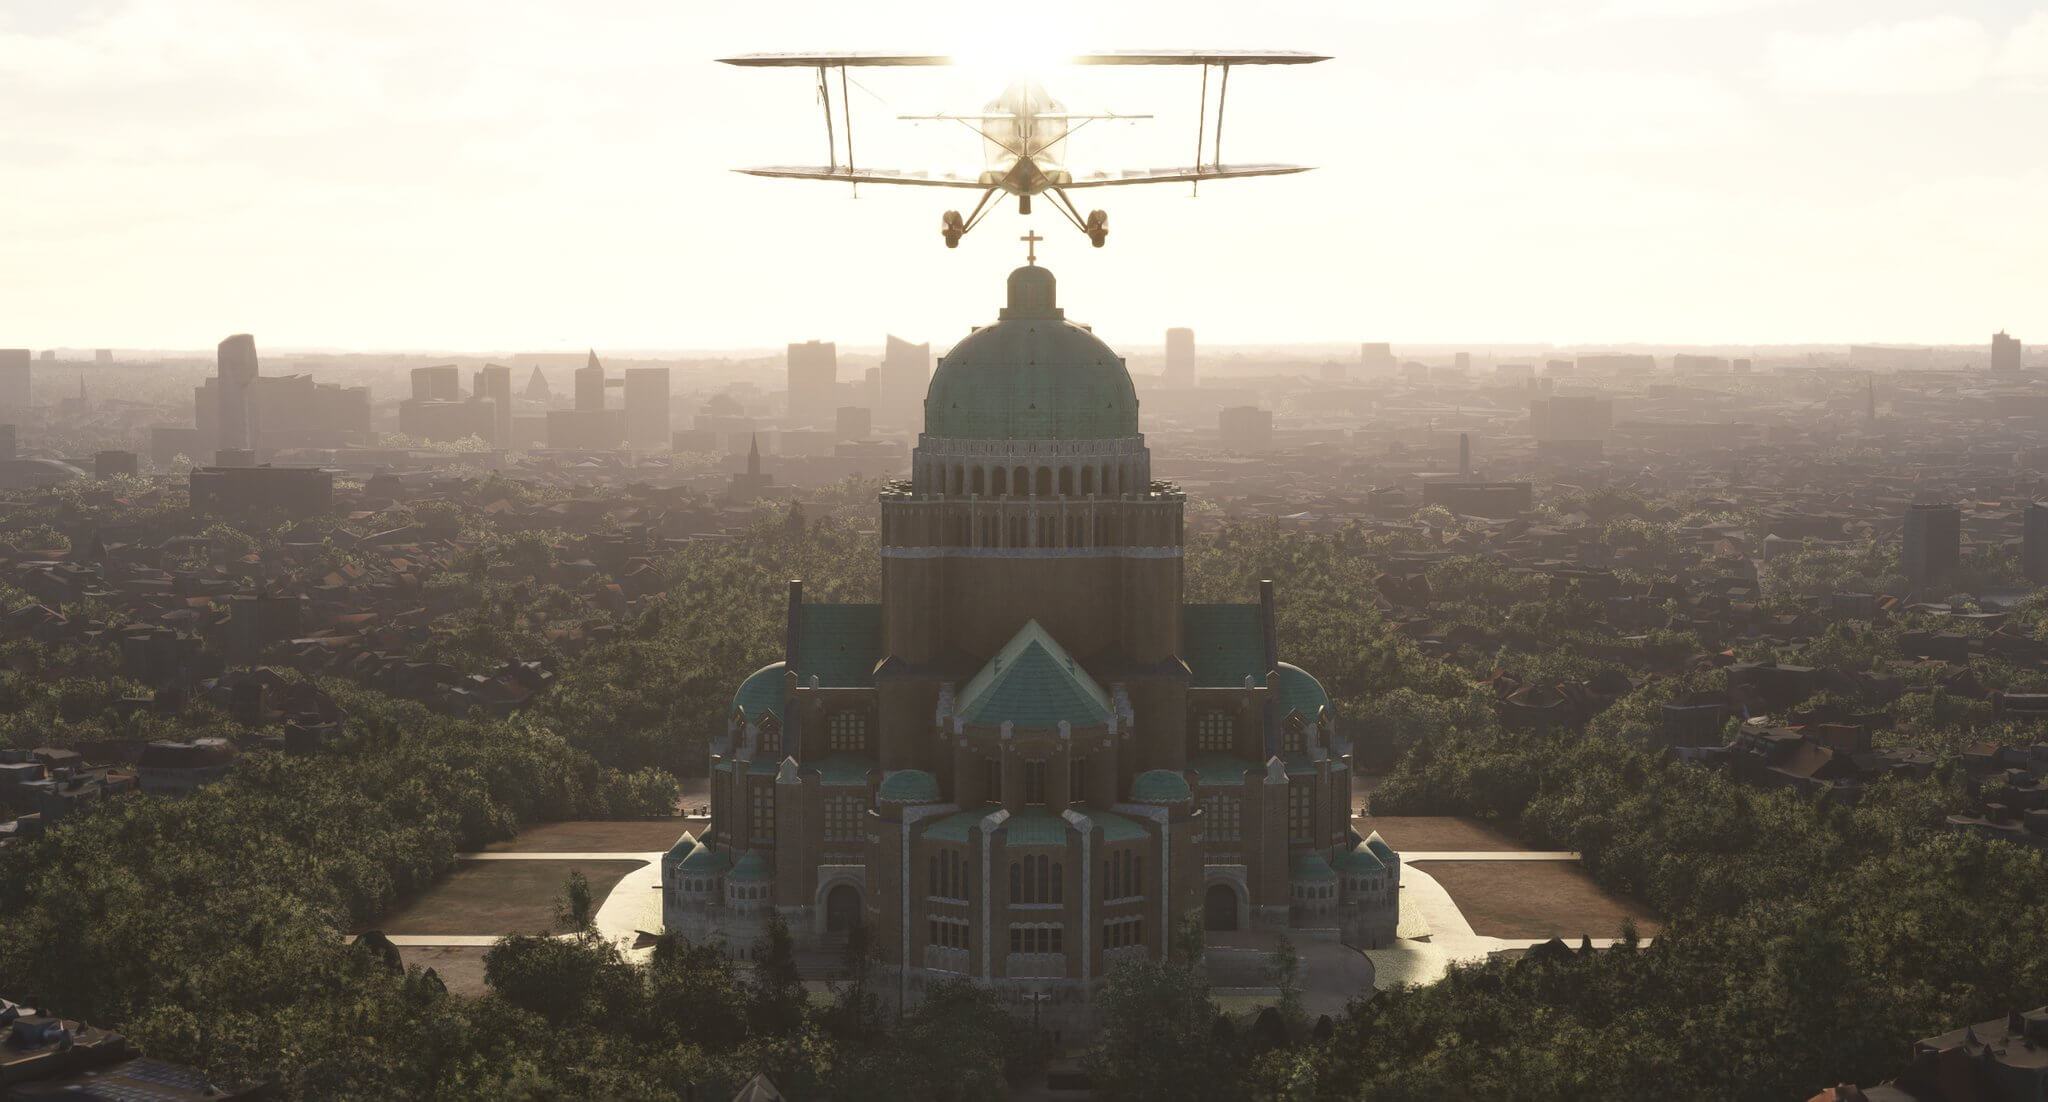 A bi-plane passes over the National Basilica of the Sacred Heart in Brussels, Belgium